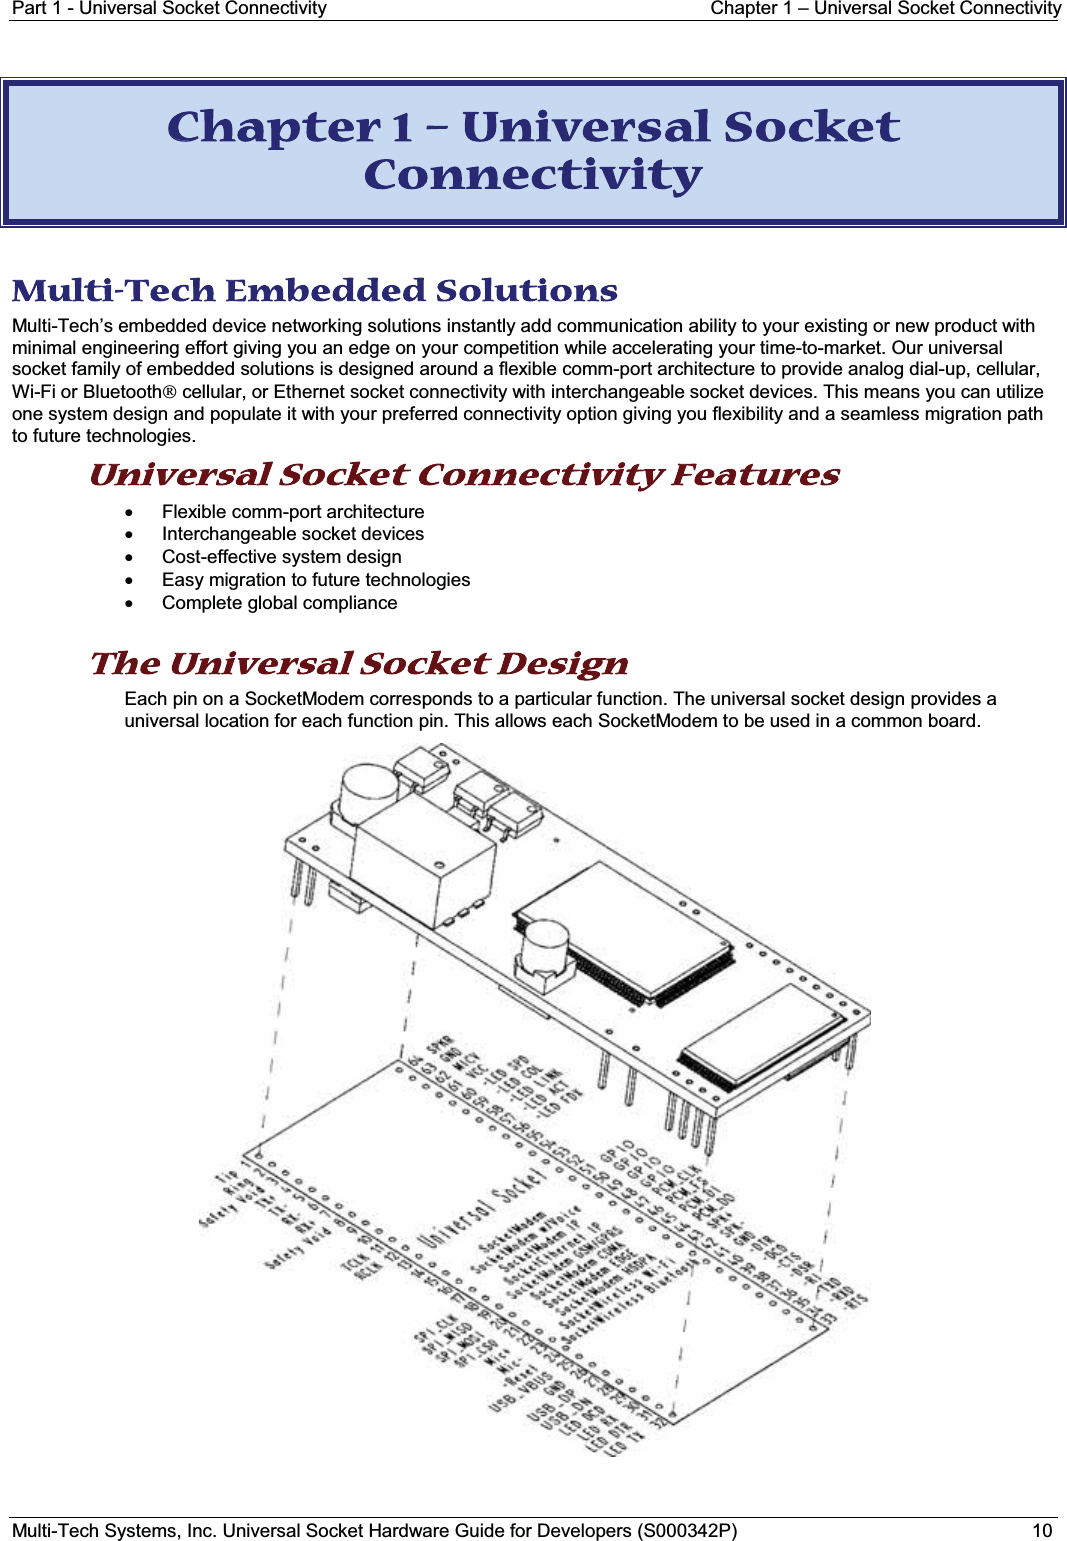 Part 1 - Universal Socket Connectivity Chapter 1 – Universal Socket ConnectivityMulti-Tech Systems, Inc. Universal Socket Hardware Guide for Developers (S000342P) 10CChapter 1 – Universal Socket Connectivity Multi-Tech Embedded Solutions Multi-Tech’s embedded device networking solutions instantly add communication ability to your existing or new product with minimal engineering effort giving you an edge on your competition while accelerating your time-to-market. Our universal socket family of embedded solutions is designed around a flexible comm-port architecture to provide analog dial-up, cellular, Wi-Fi or Bluetoothcellular, or Ethernet socket connectivity with interchangeable socket devices. This means you can utilize one system design and populate it with your preferred connectivity option giving you flexibility and a seamless migration path to future technologies. Universal Socket Connectivity Features xFlexible comm-port architecture xInterchangeable socket devicesxCost-effective system designxEasy migration to future technologiesxComplete global complianceThe Universal Socket Design  Each pin on a SocketModem corresponds to a particular function. The universal socket design provides a universal location for each function pin. This allows each SocketModem to be used in a common board.